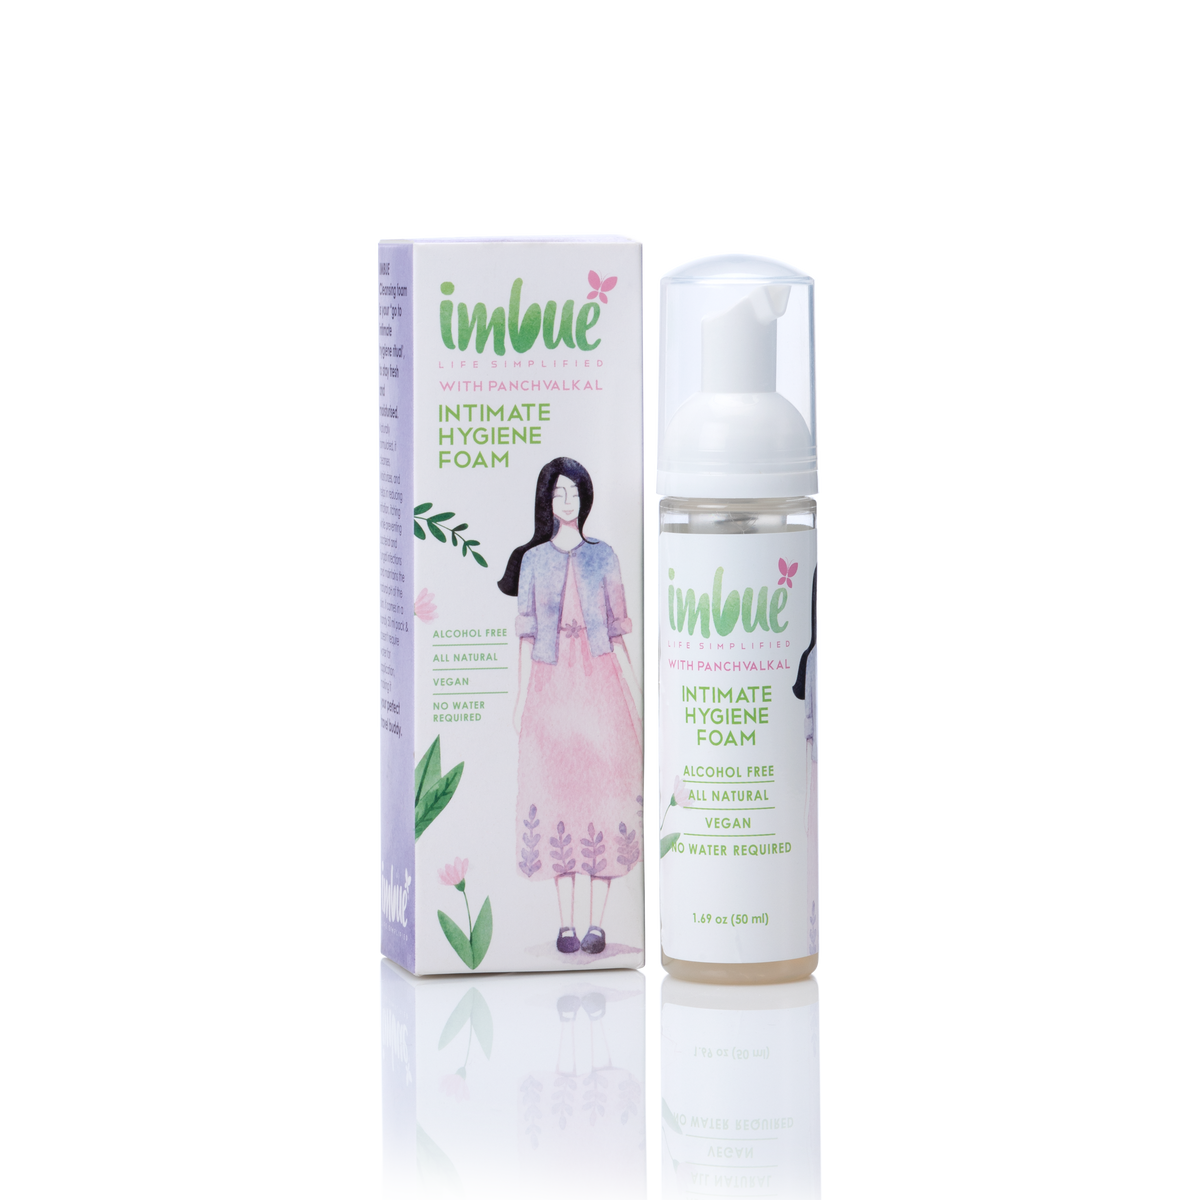 Imbue Natural Intimate Hygiene Vaginal Foam for Women - 50 ml Pack of 2 Combo